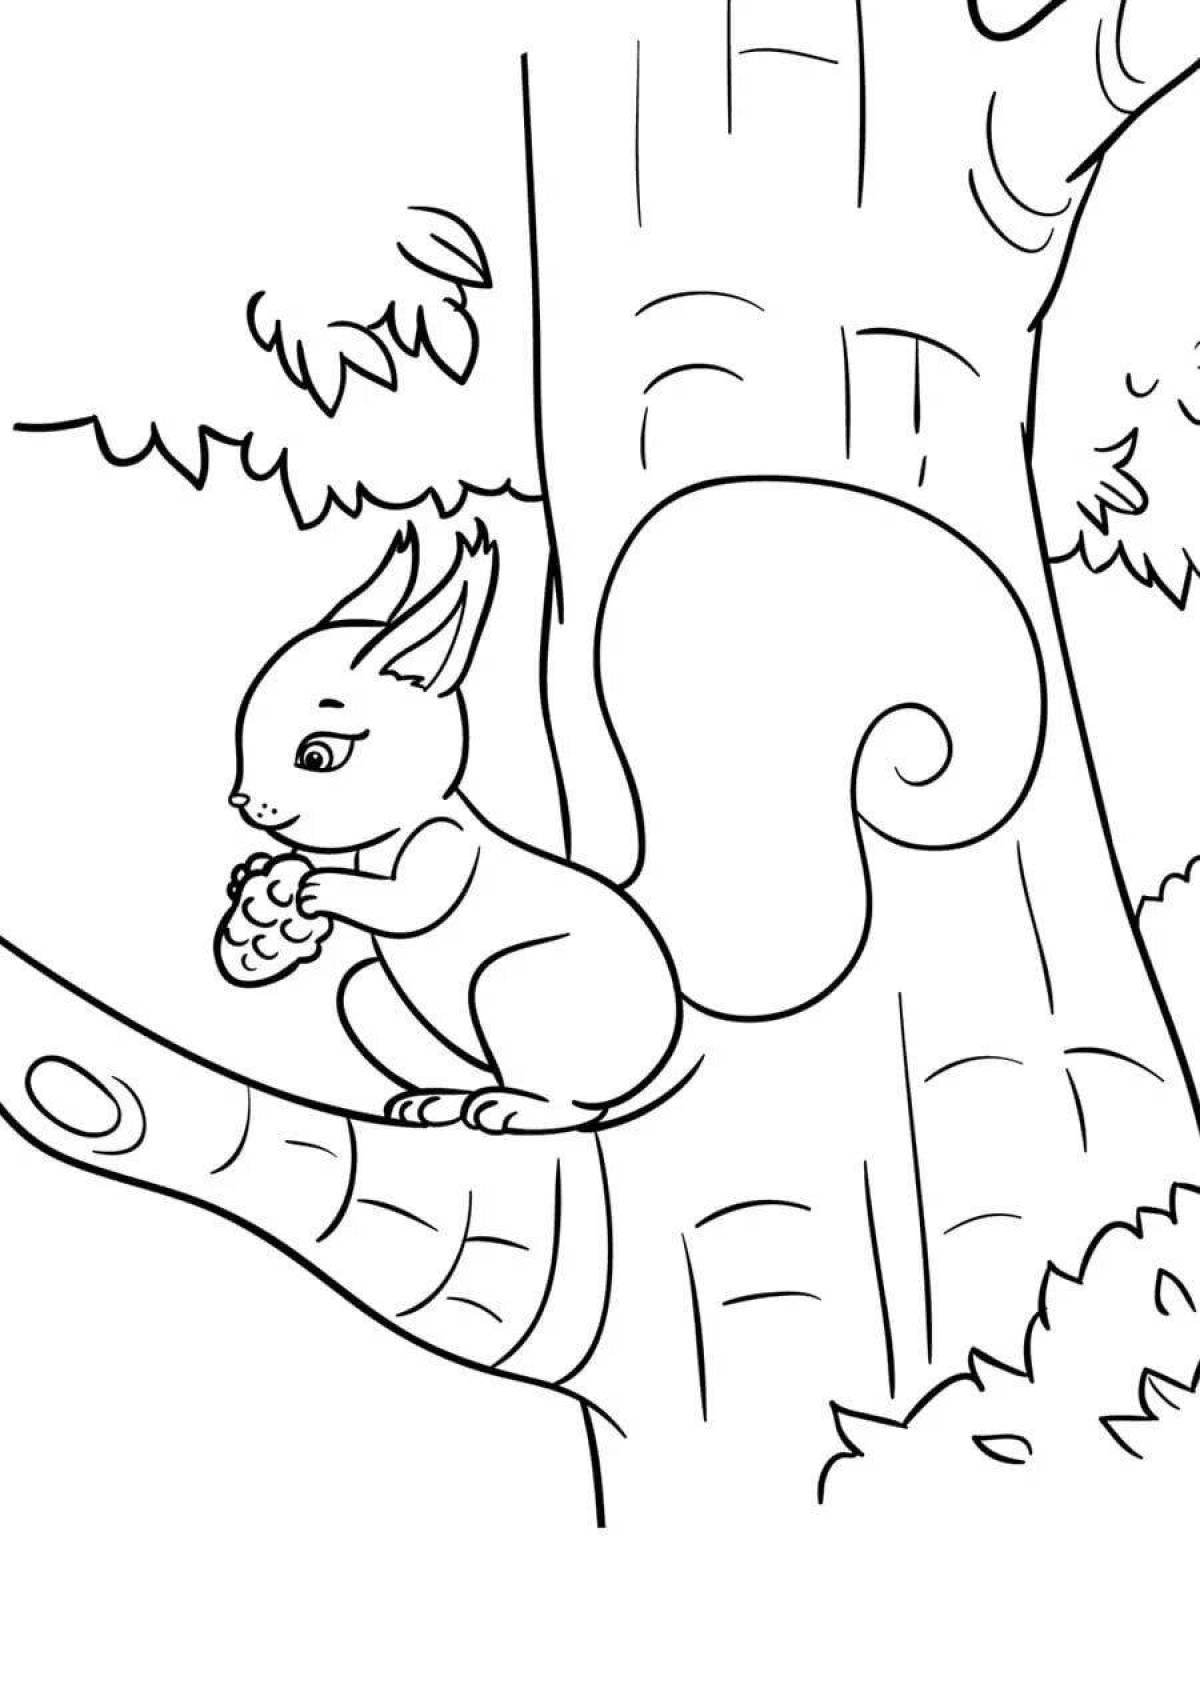 Coloring book playful squirrel